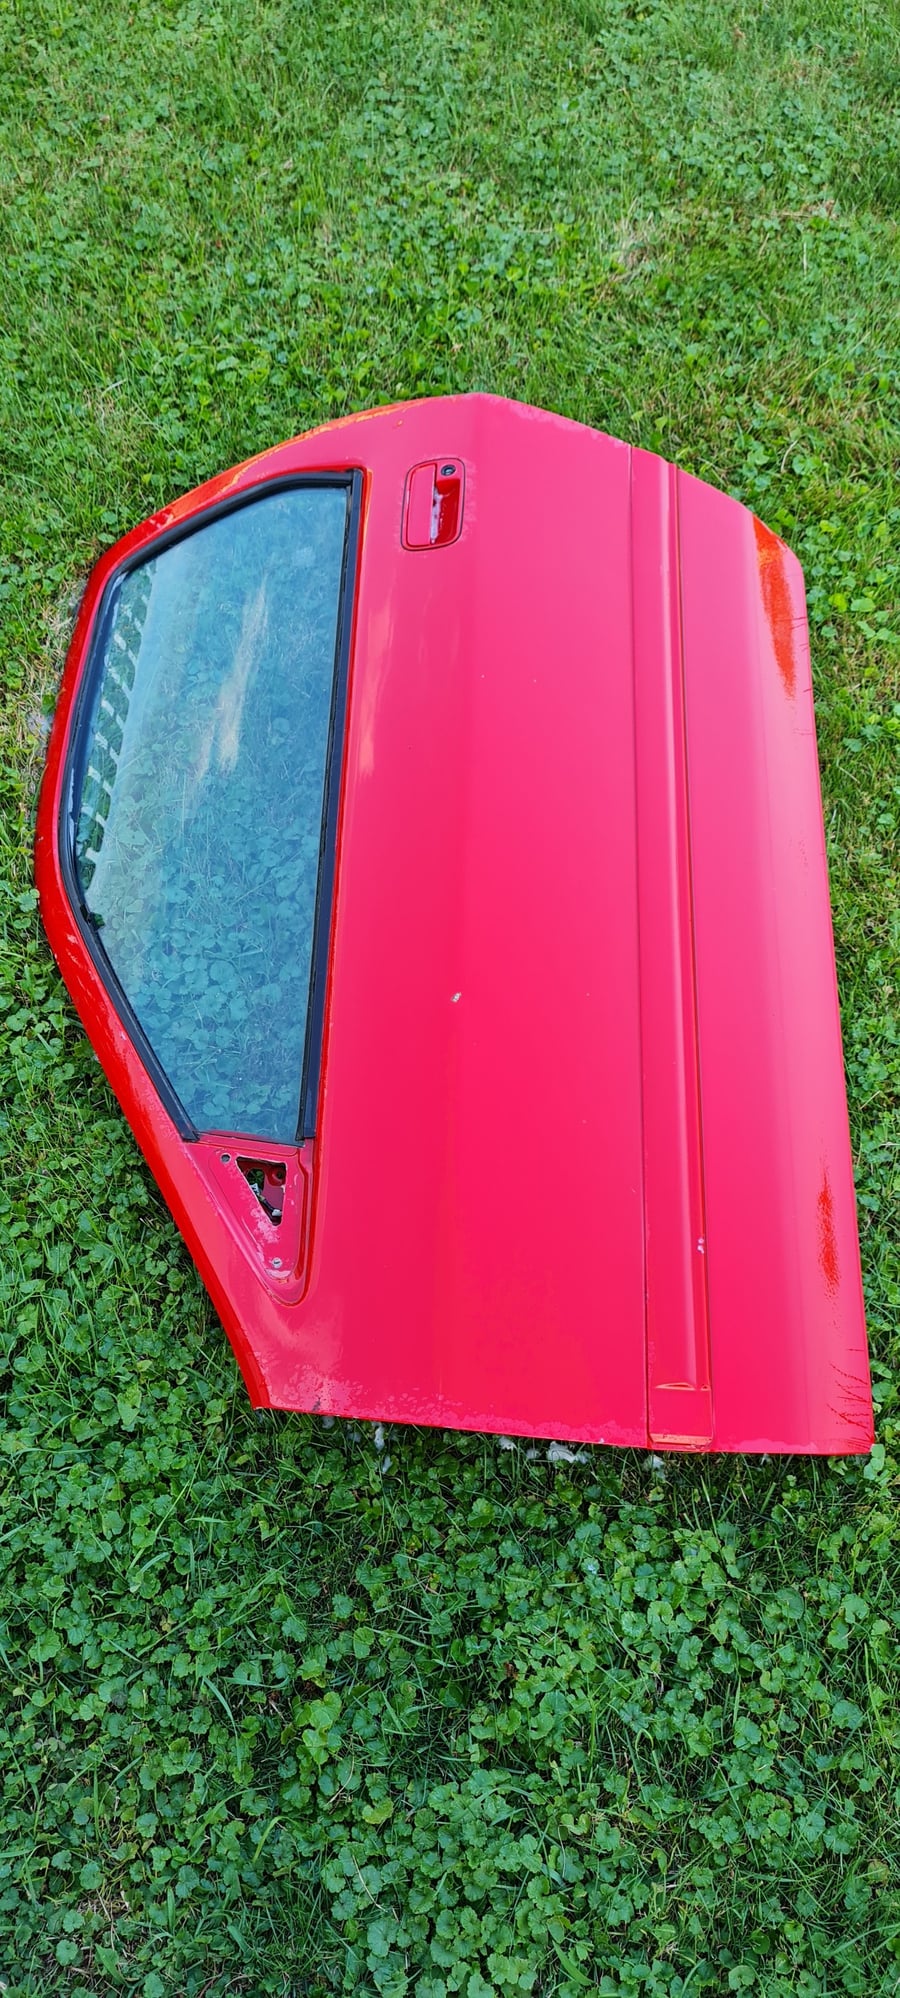 Exterior Body Parts - 1991 RX-7 rear glass hatch with wiper hole, left and right doors with power windows - Used - 1988 to 1991 Mazda RX-7 - Strongsville, OH 44136, United States